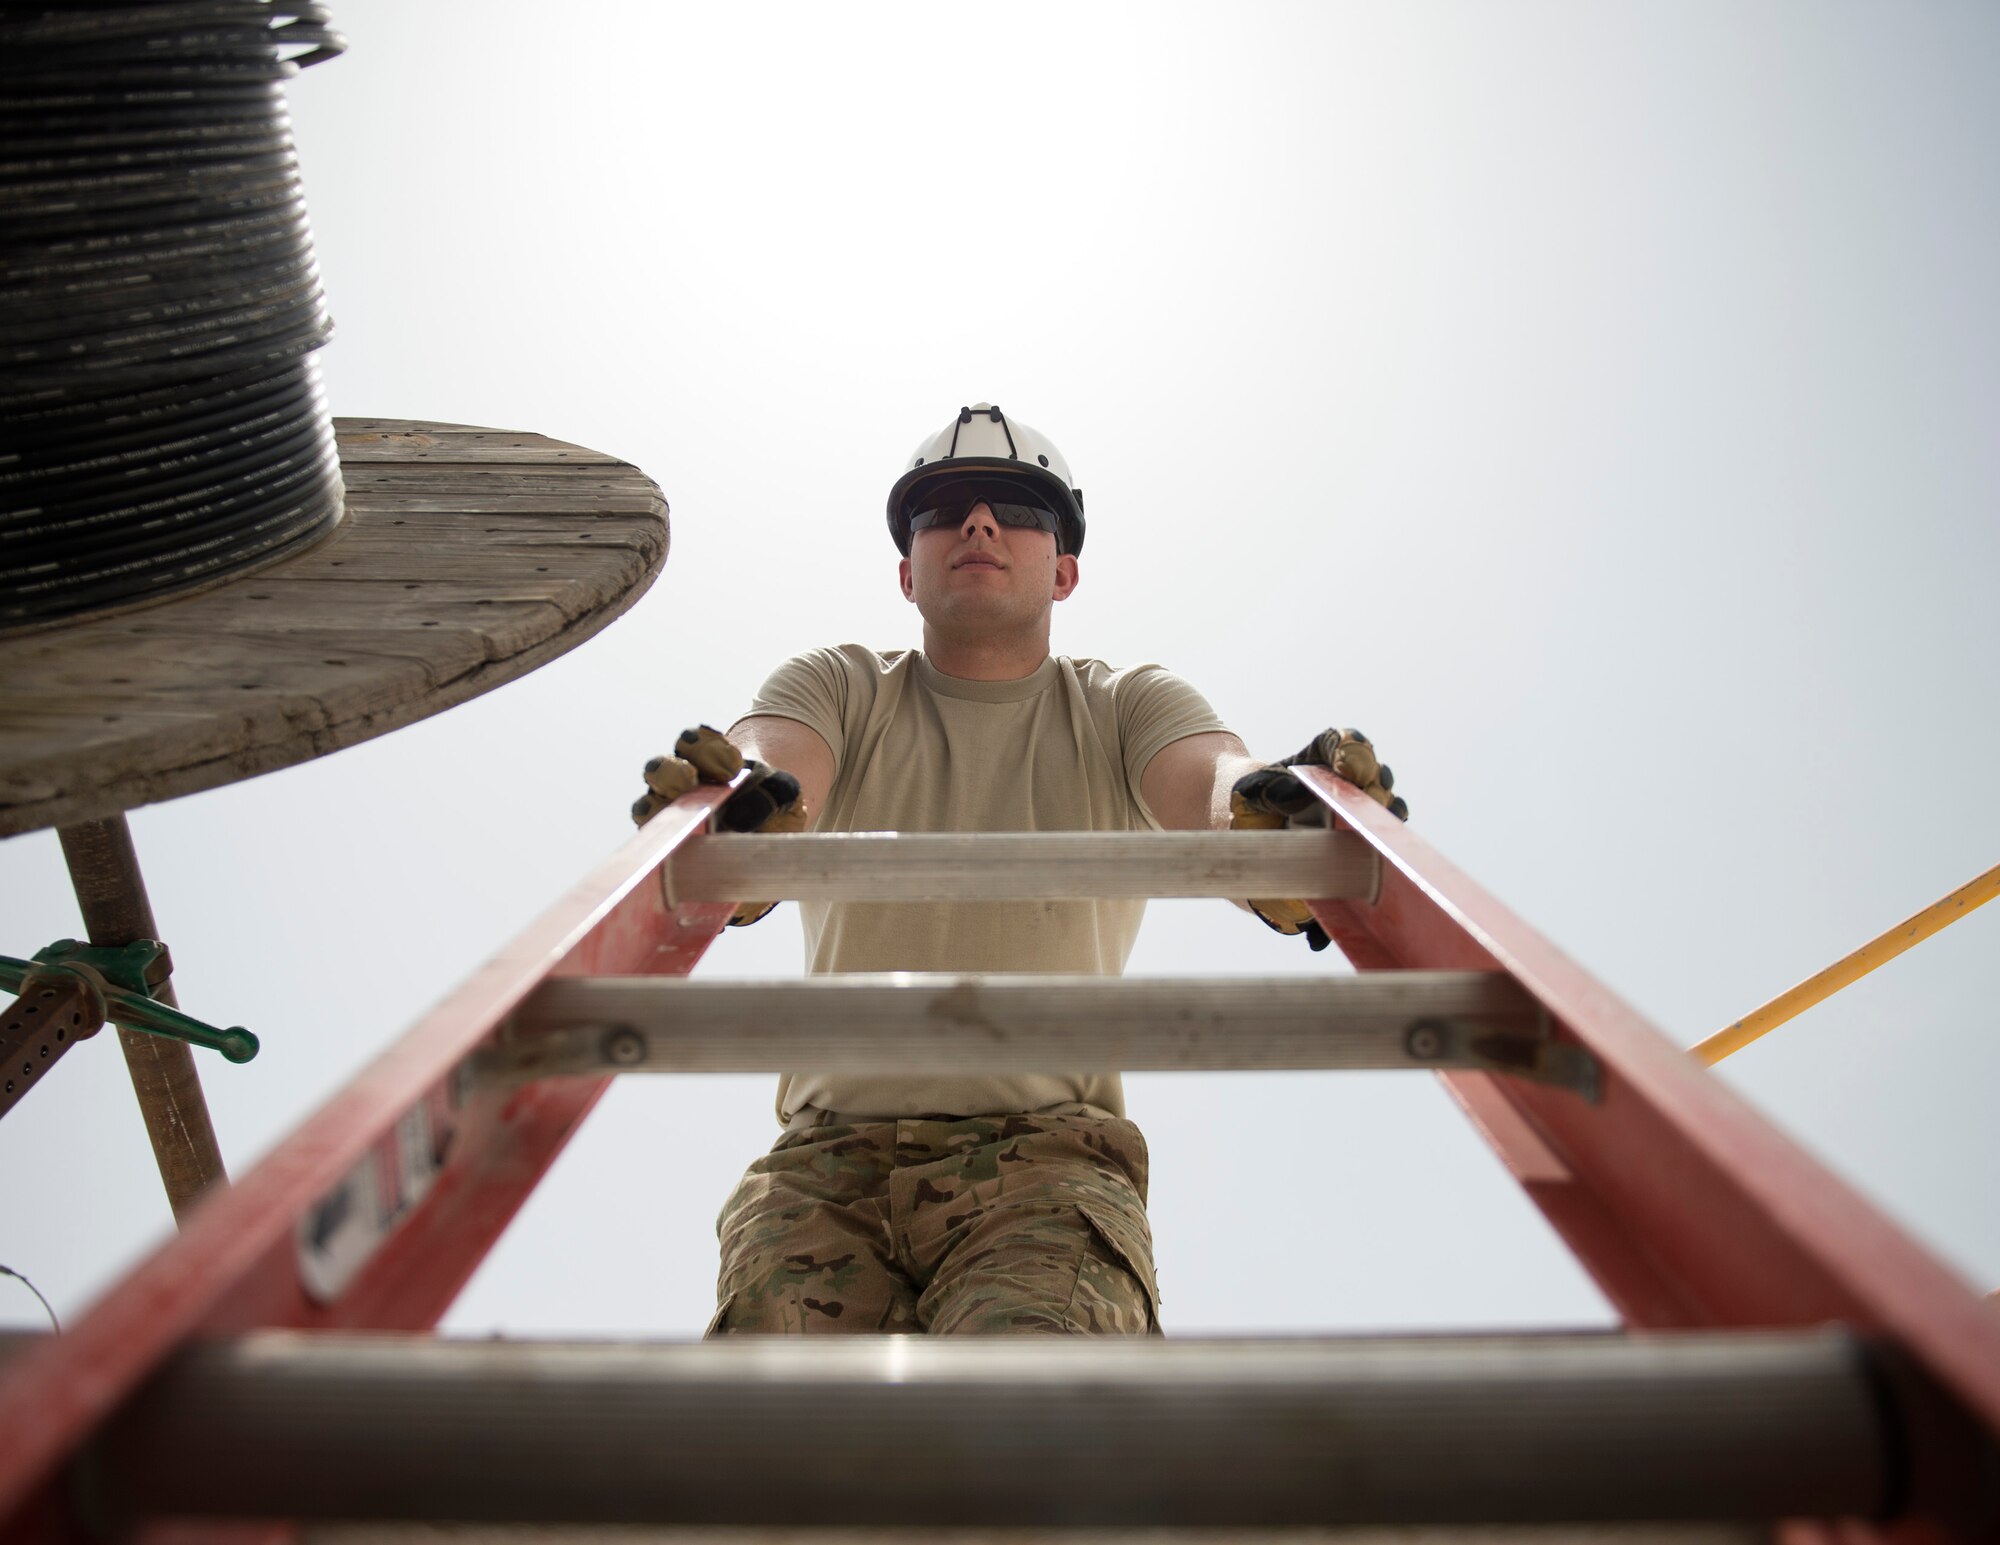 U.S. Air Force Senior Airman Ebby Bryce, a cable and antenna system specialist with the 379th Expeditionary Communication Squadron, holds the ladder at Al Udeid Air Base, Qatar, July 14, 2017. Bryce is part of team of airmen that is responsible for installing, sustaining, and repairing miles of copper and fiber optics cables at Al Udeid Air Base. (U.S. Air Force photo by Tech. Sgt. Amy M. Lovgren)